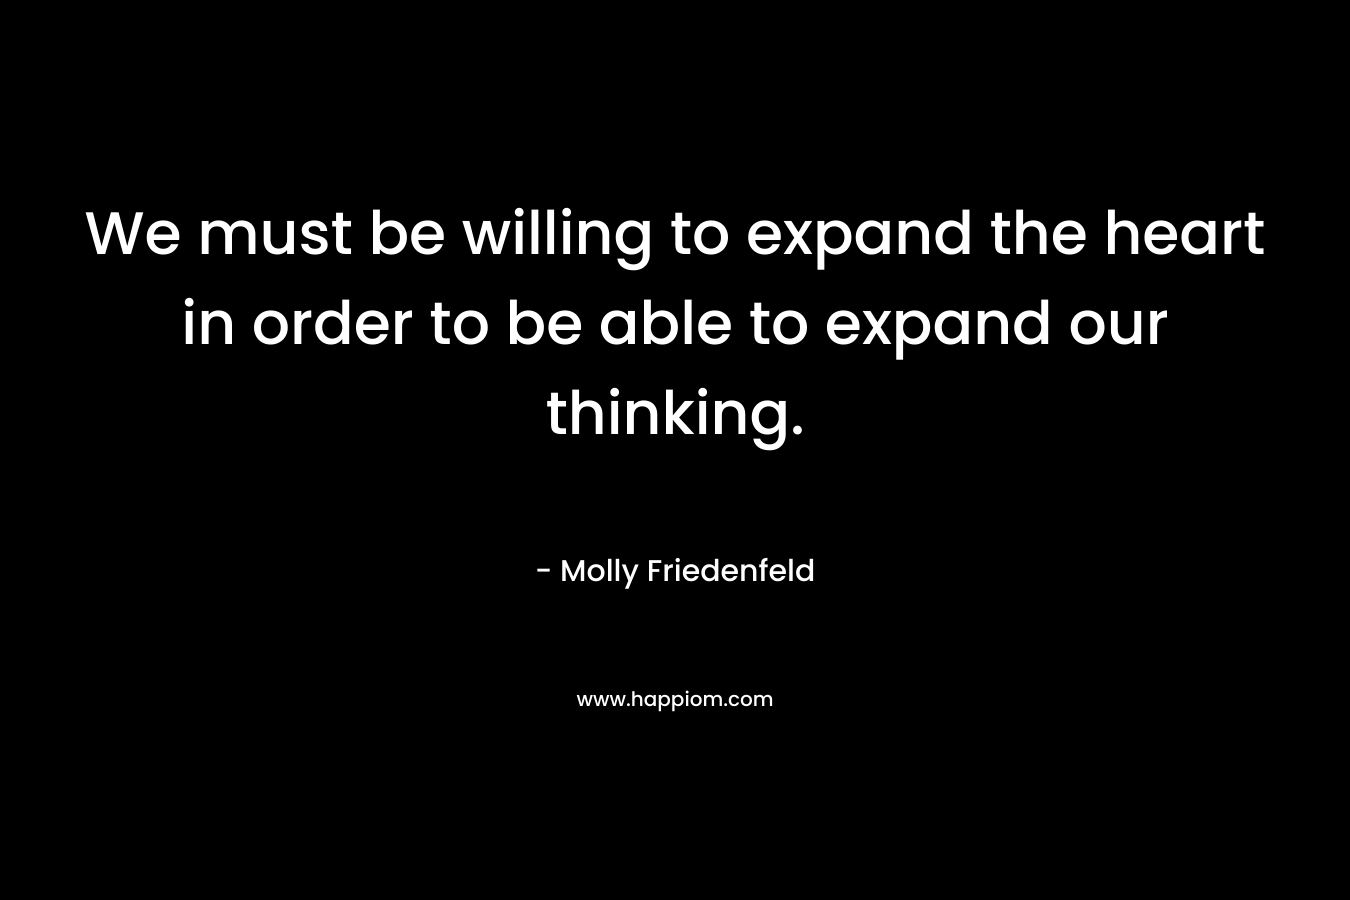 We must be willing to expand the heart in order to be able to expand our thinking.